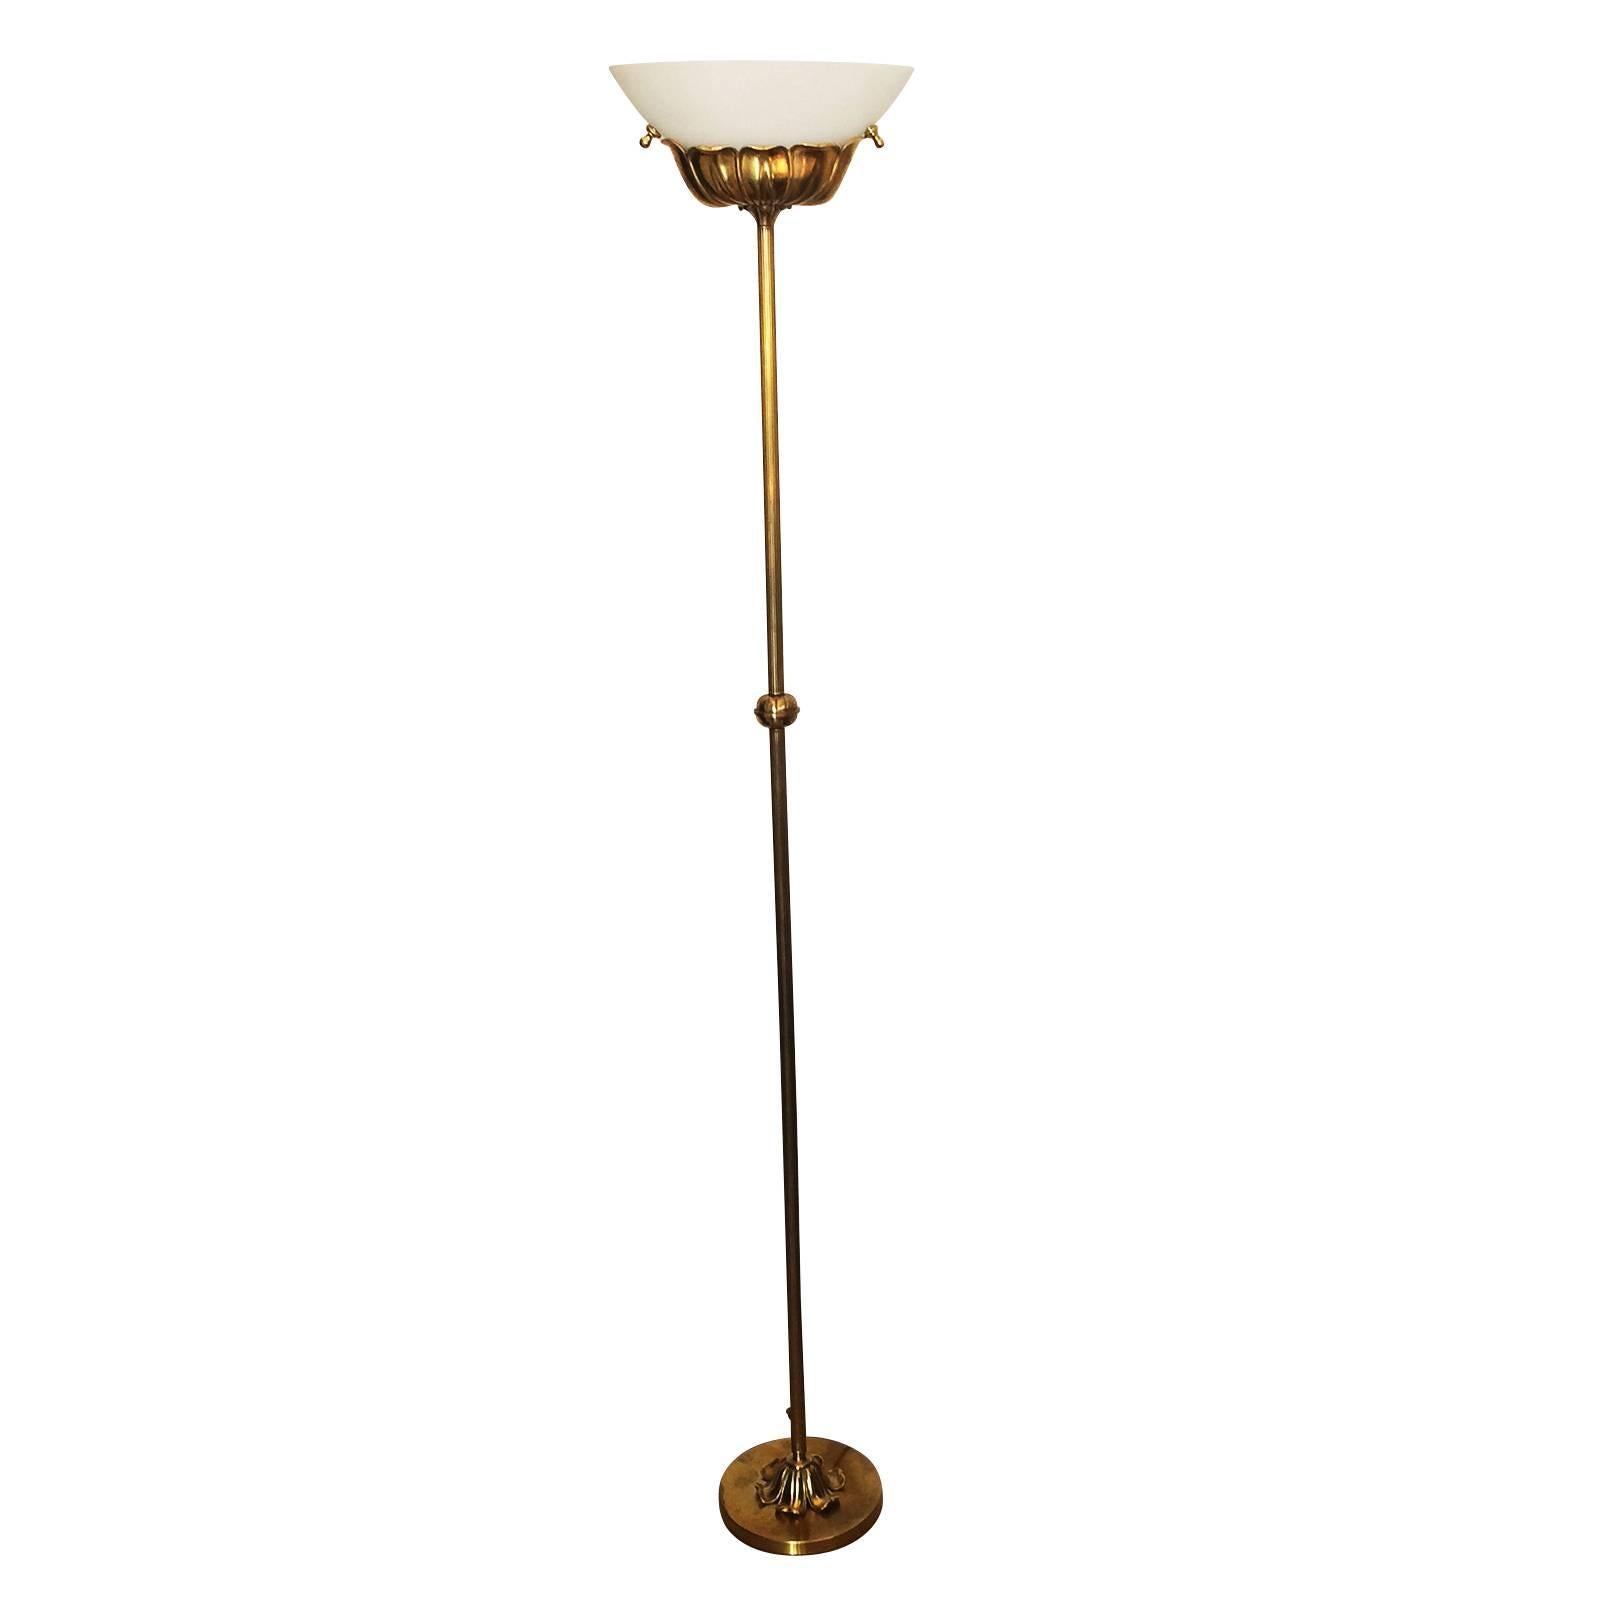 Midcentury Floor Standing Lamp, by Maison Lucien Gau, who have been making lamps in Paris since 1860. They are listed in France as a Living Treasure Company. This one is generally all gilt on bronze, amazing with a fluted tube rising upward from a